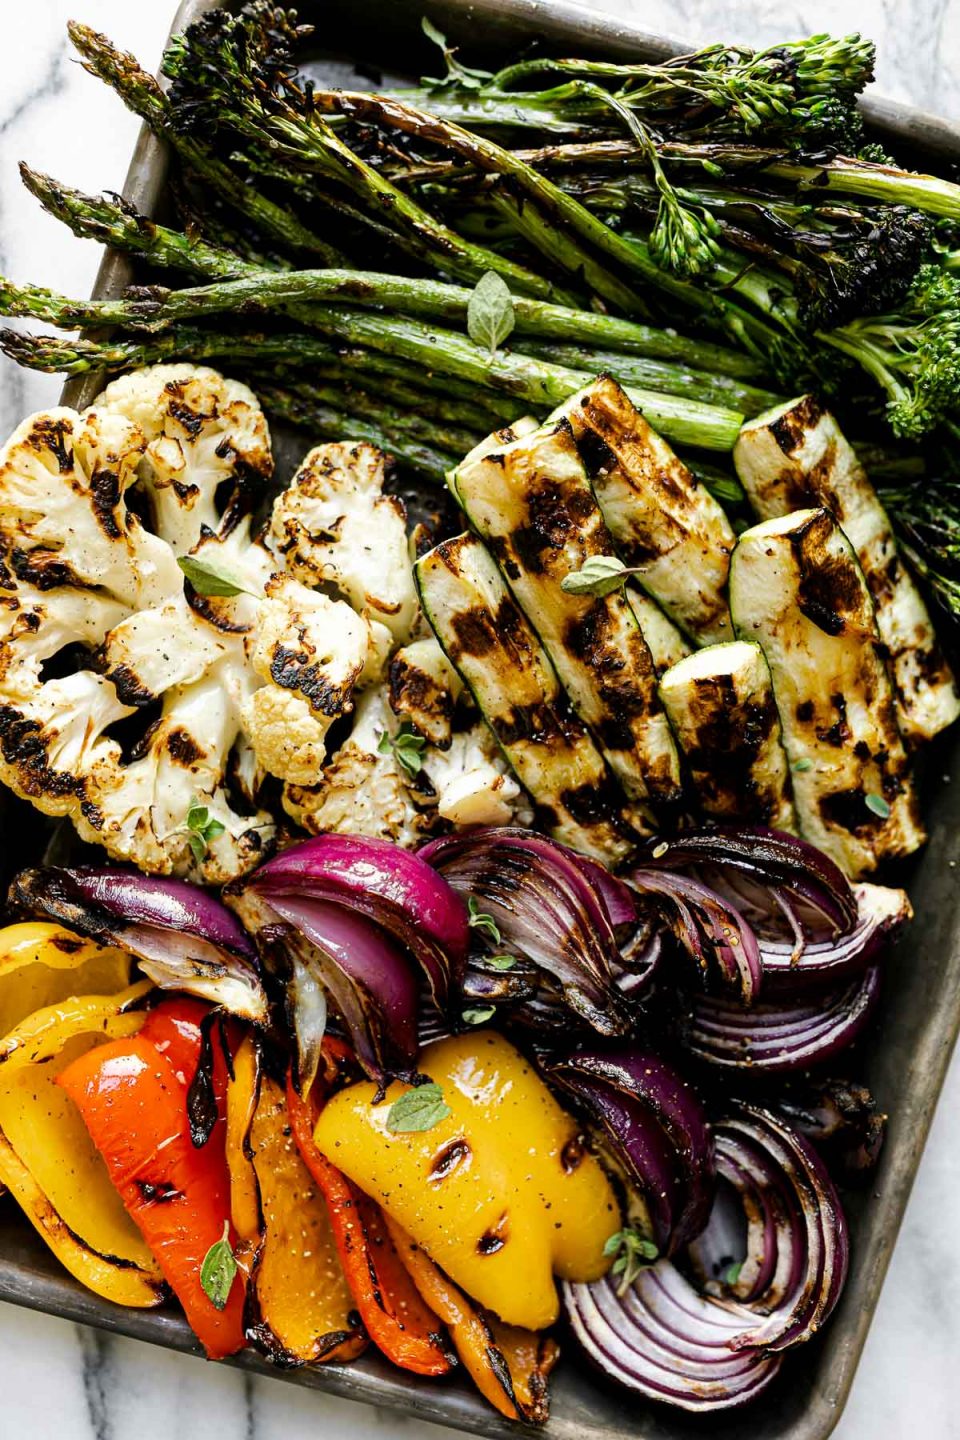 A variety of grilled veggies including grilled broccolini, grilled asparagus, grilled cauliflower, grilled zucchini, grilled onion, & grilled peppers on a aluminum baking sheet. The baking sheet rests on a white & gray marble surface.